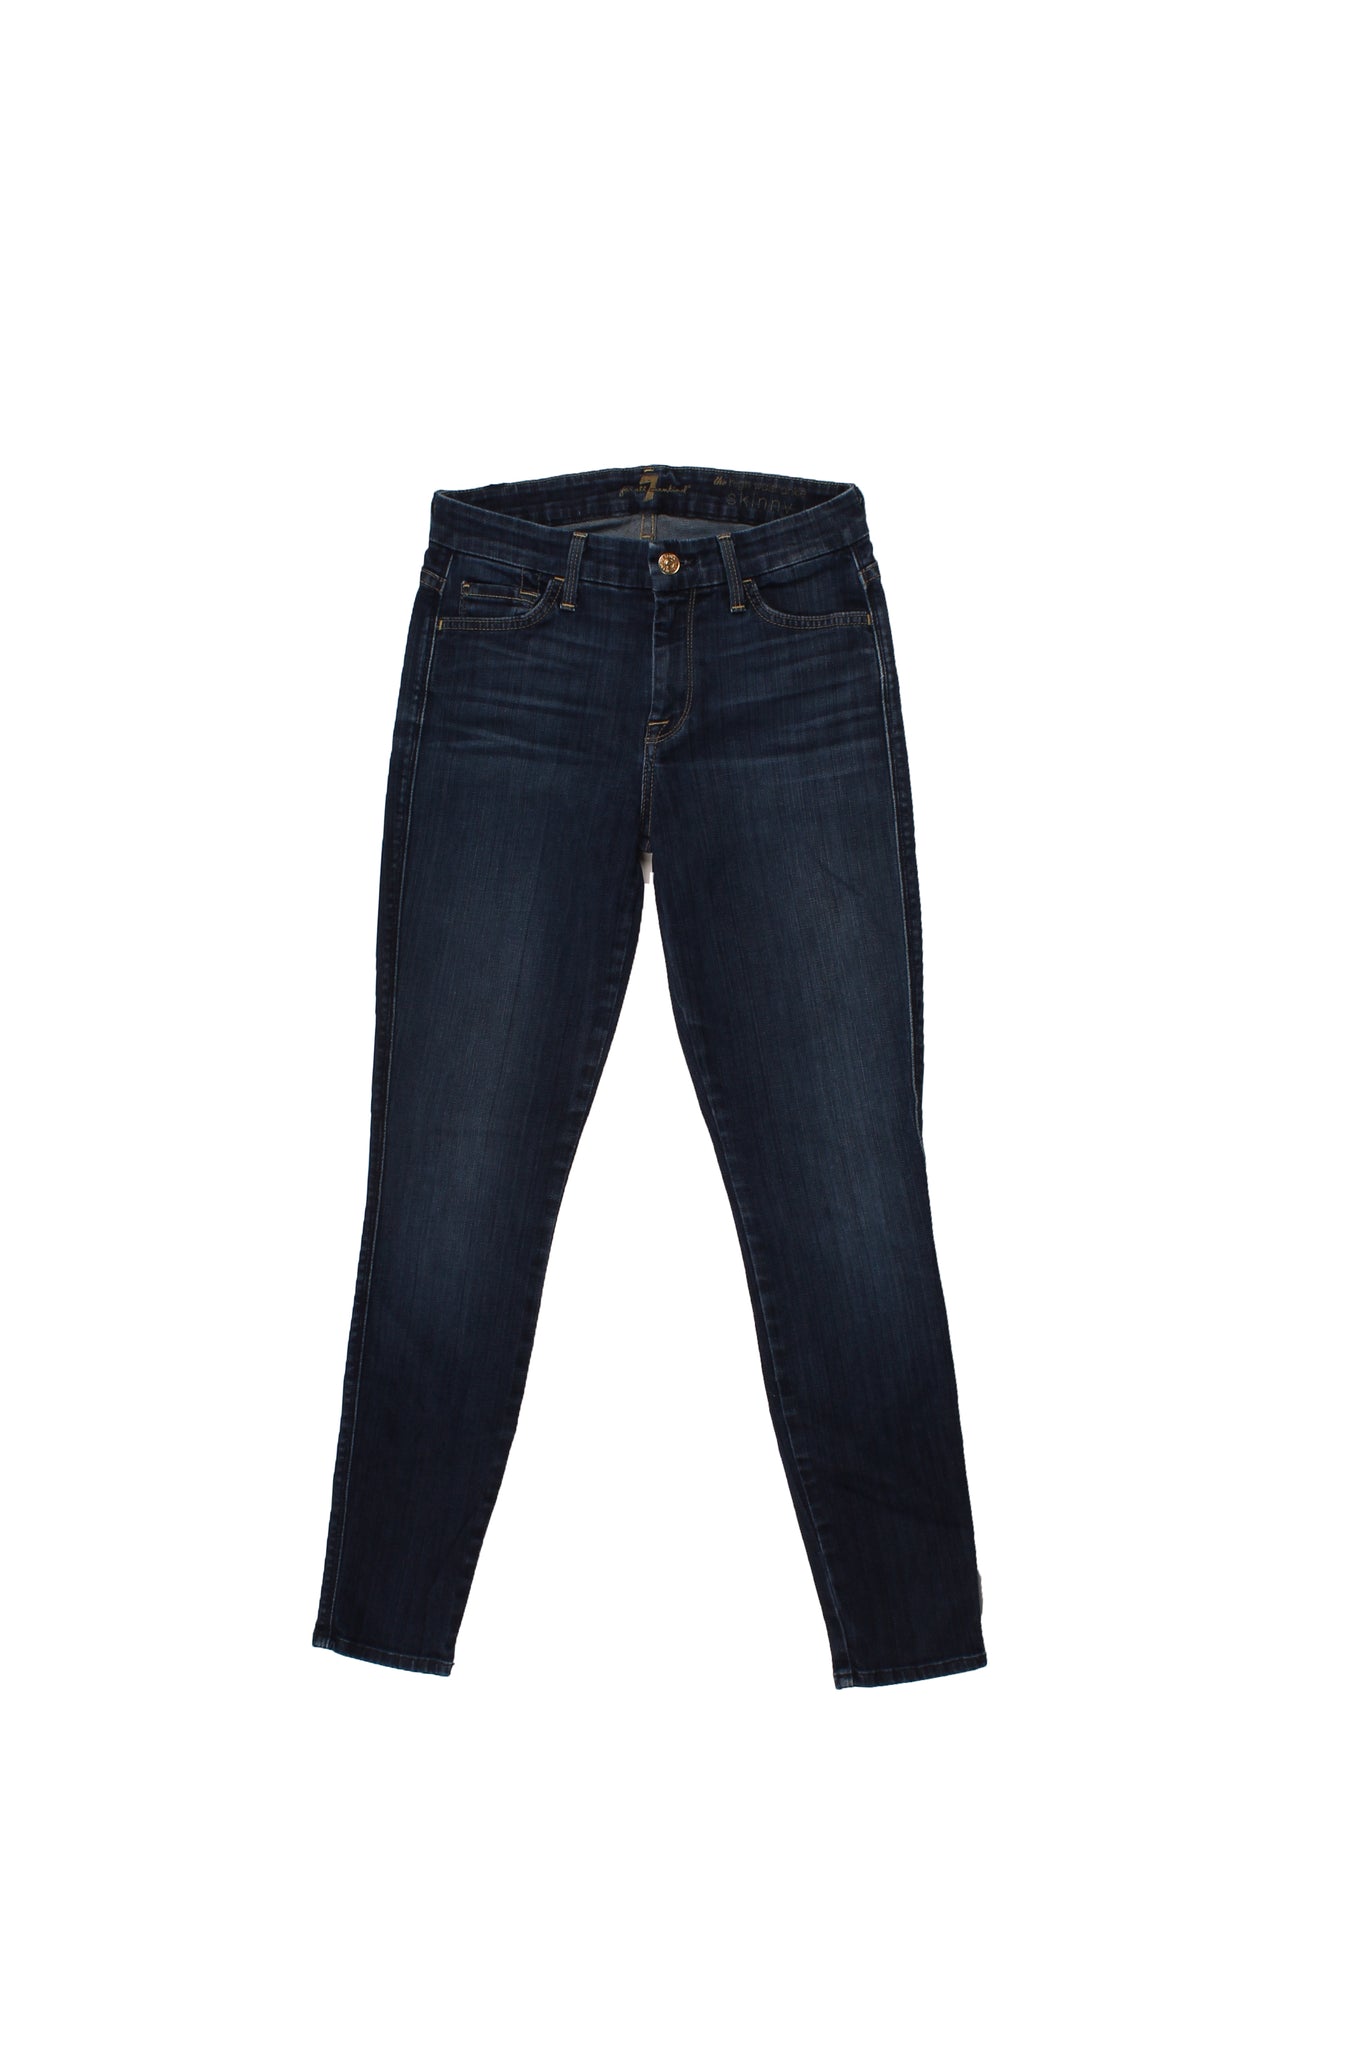 7 FOR ALL MANKIND - Skinny Jeans Azul